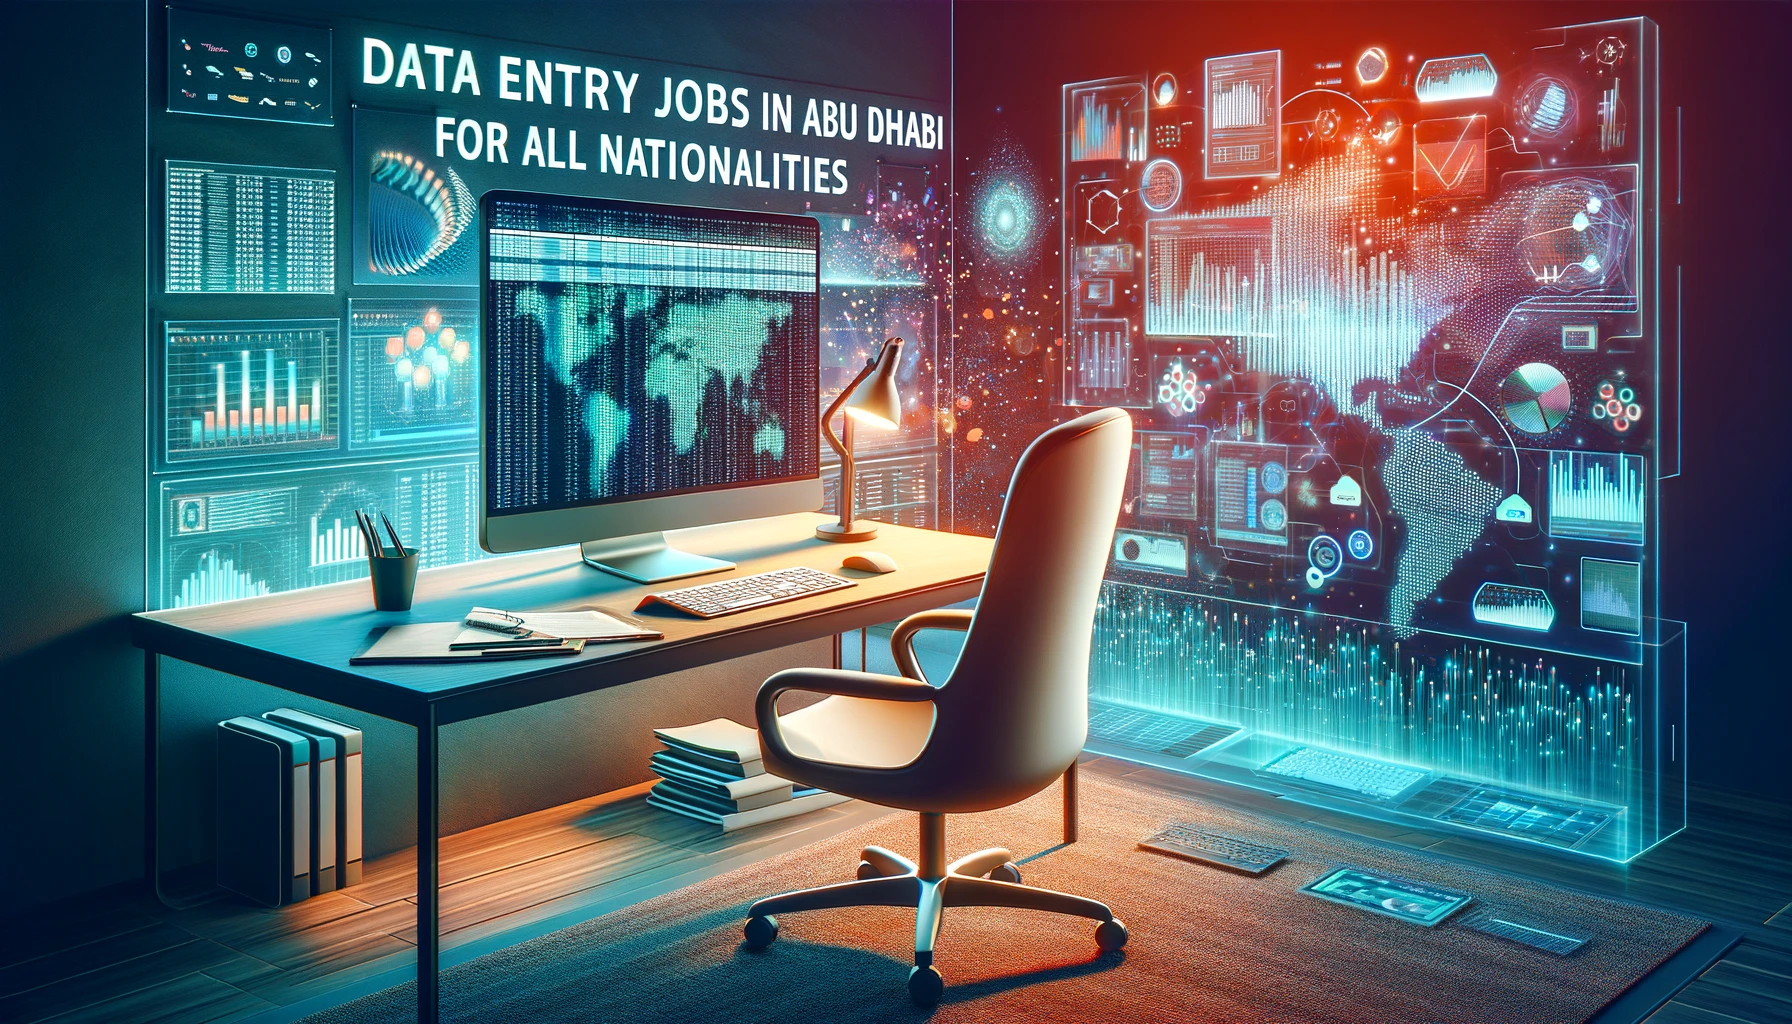 Data Entry jobs in Abu Dhabi for all nationalities